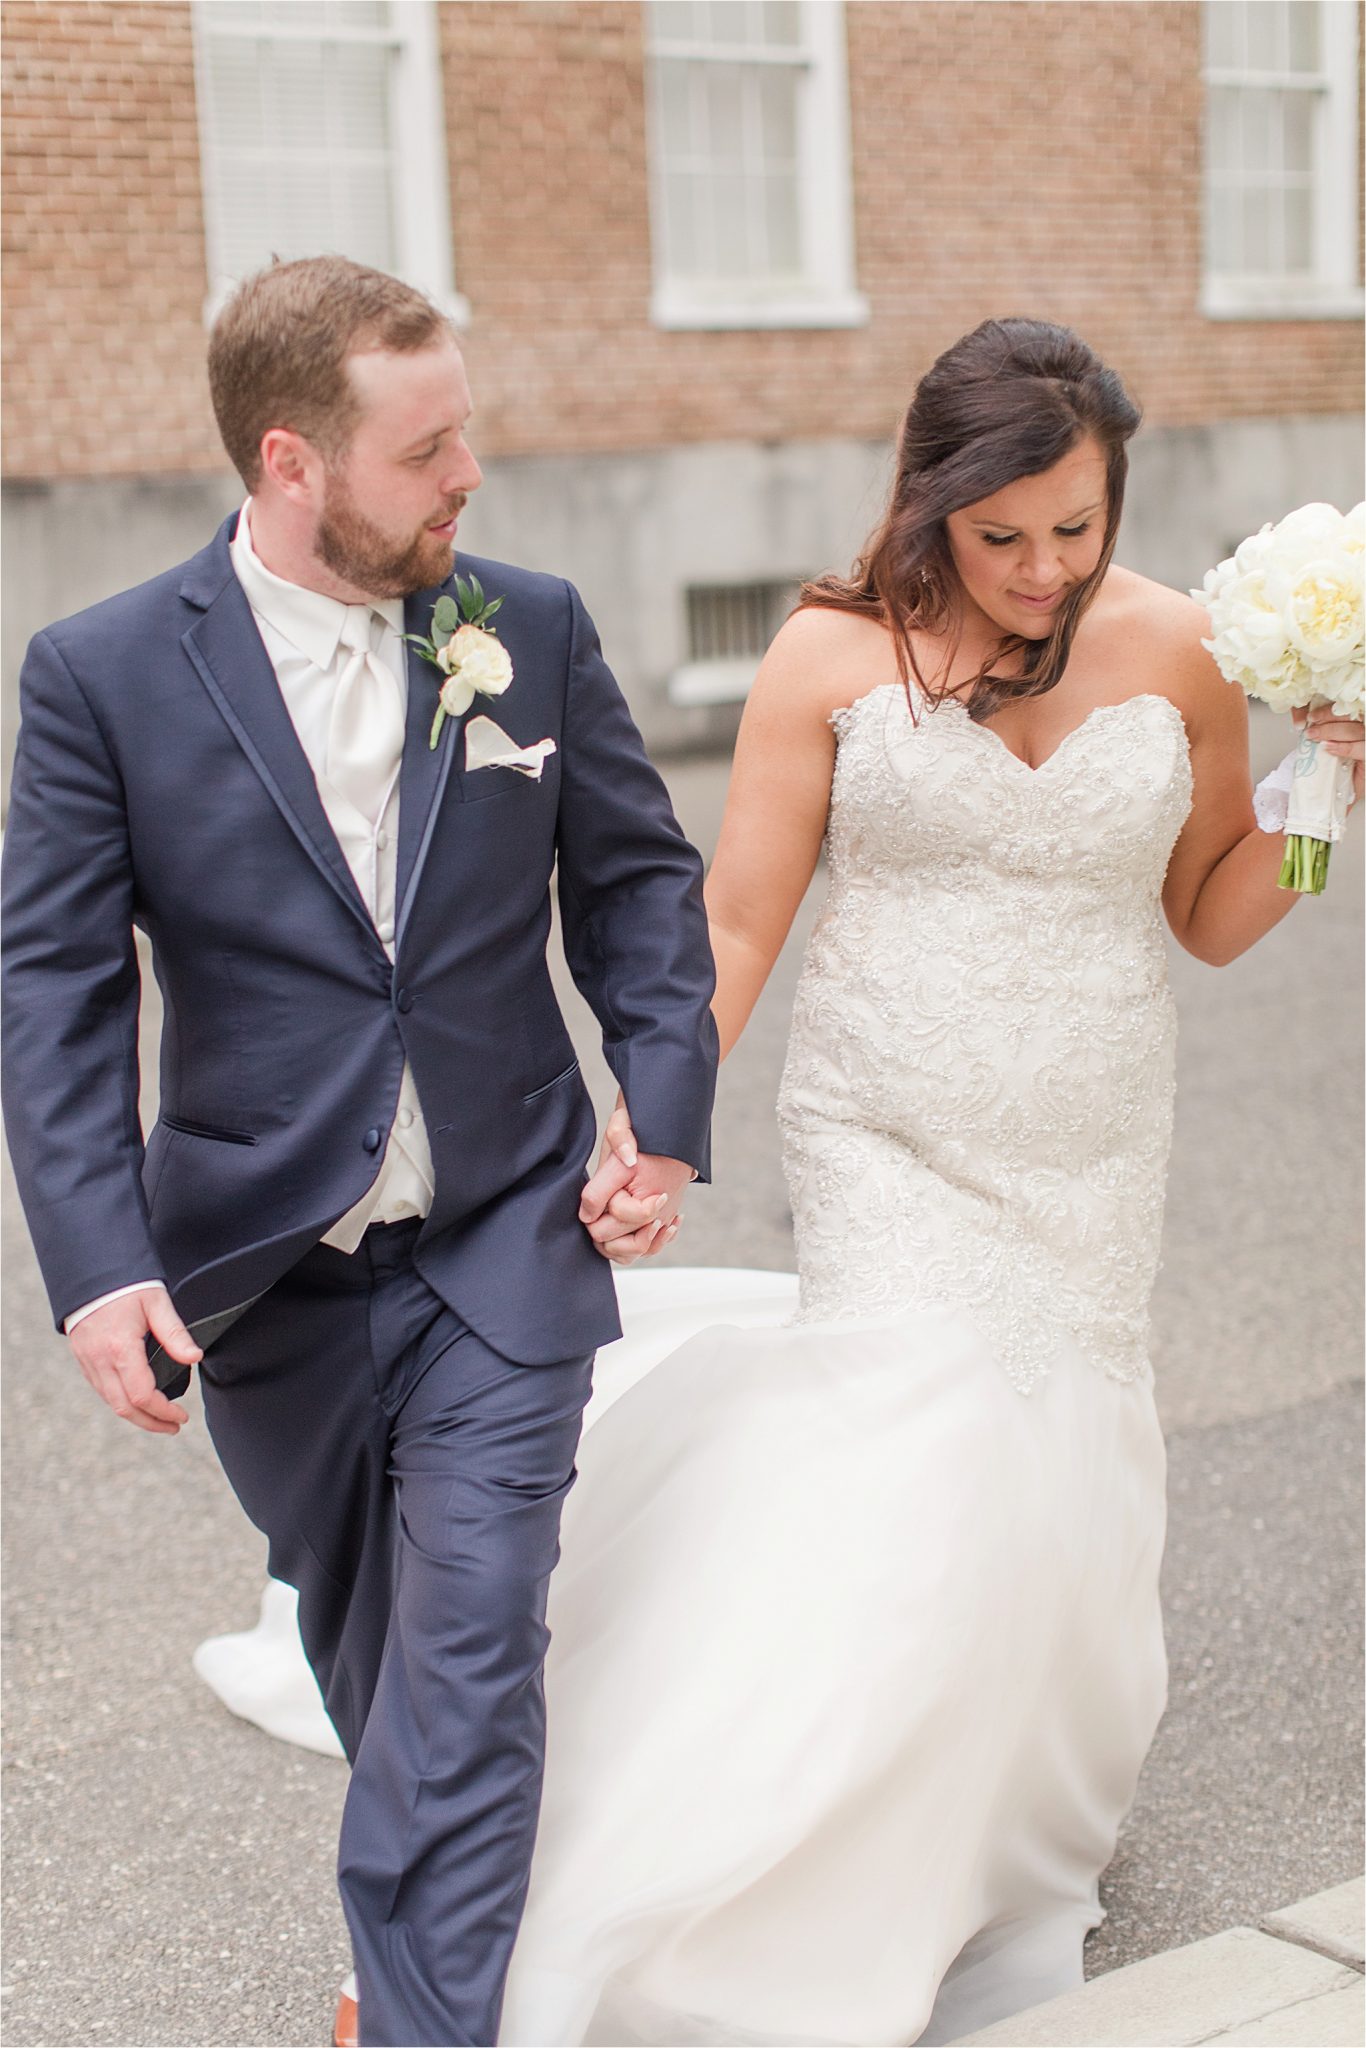 bride and groom photos-navy suit-white roses-wedding day photos-white tie-husband and wife photos-holding hands-navy suit-white tie